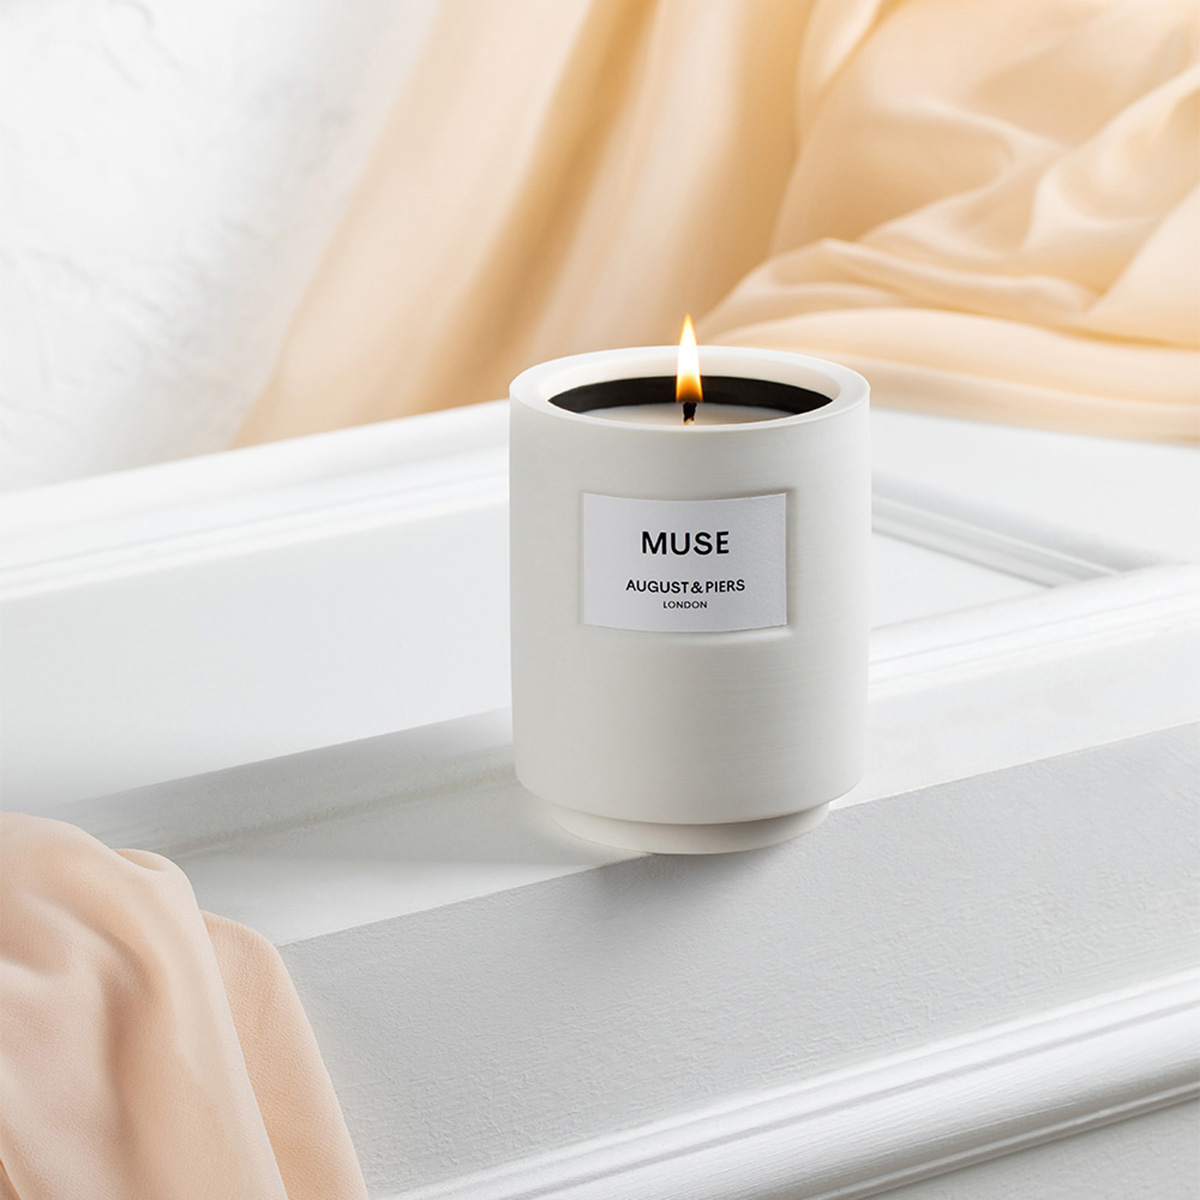 AUGUST&PIERS - Muse Scented Candle